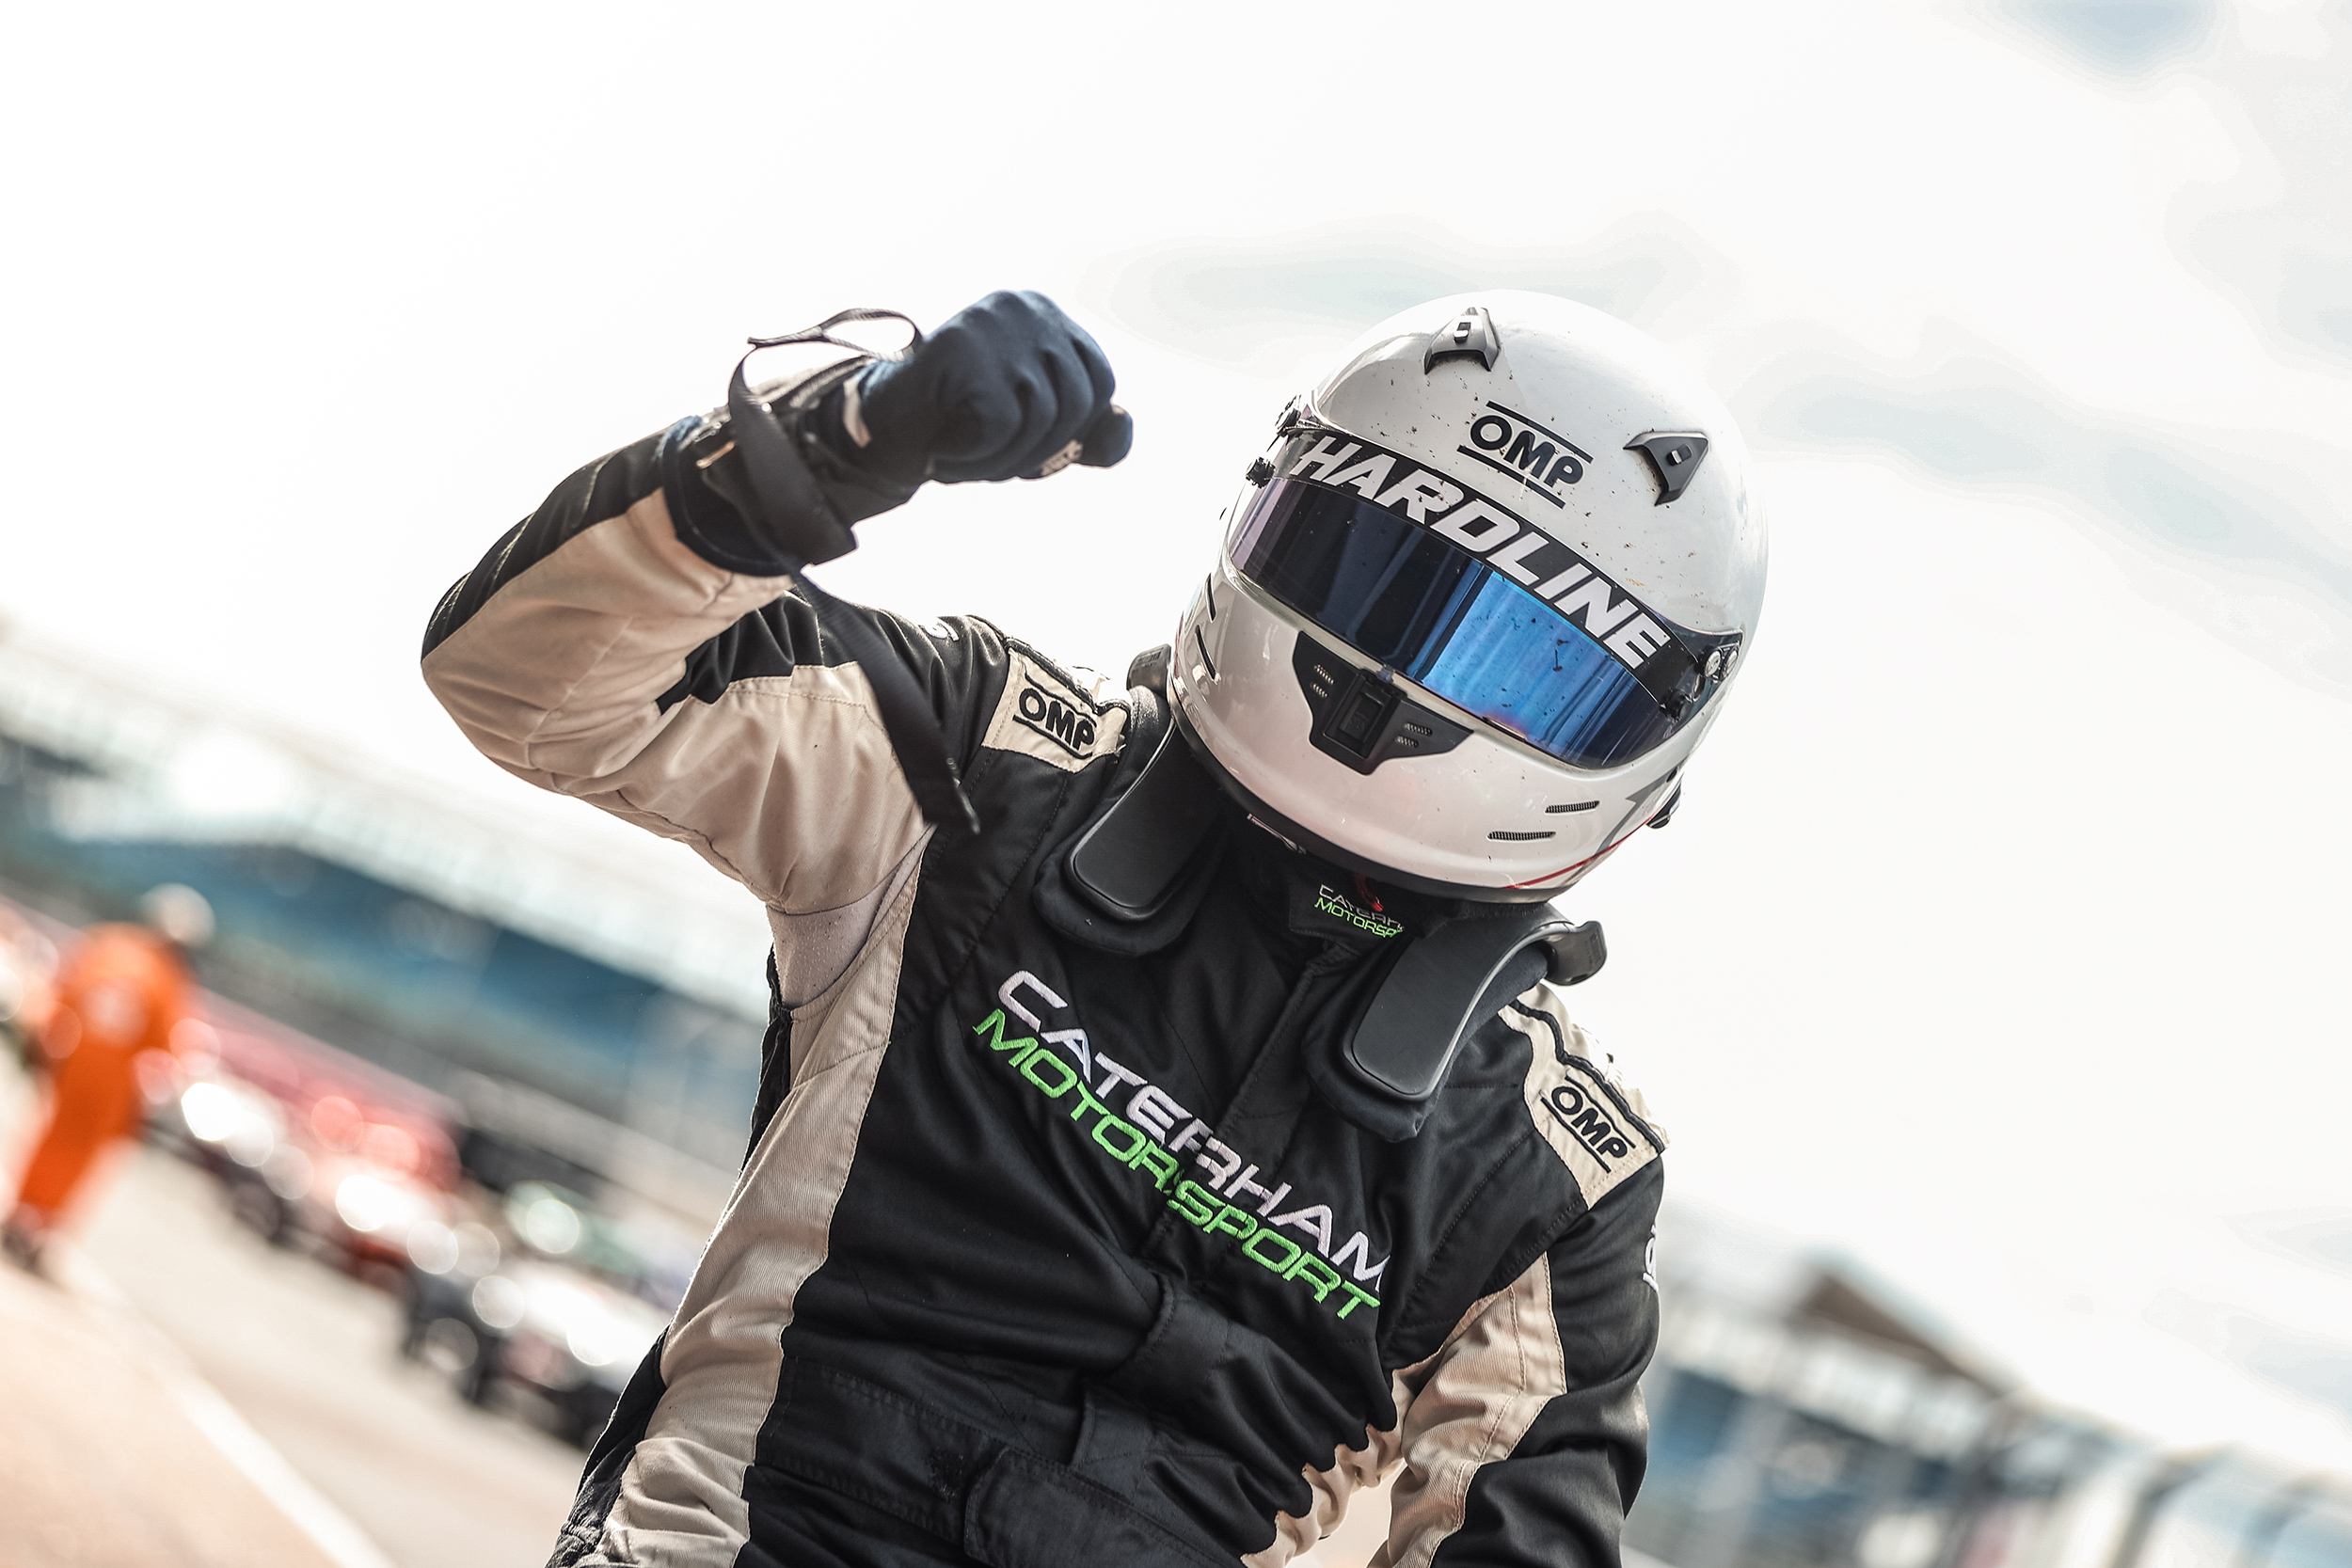 EBC-Equipped Caterham Racers Tackle the Home of British Motorsport